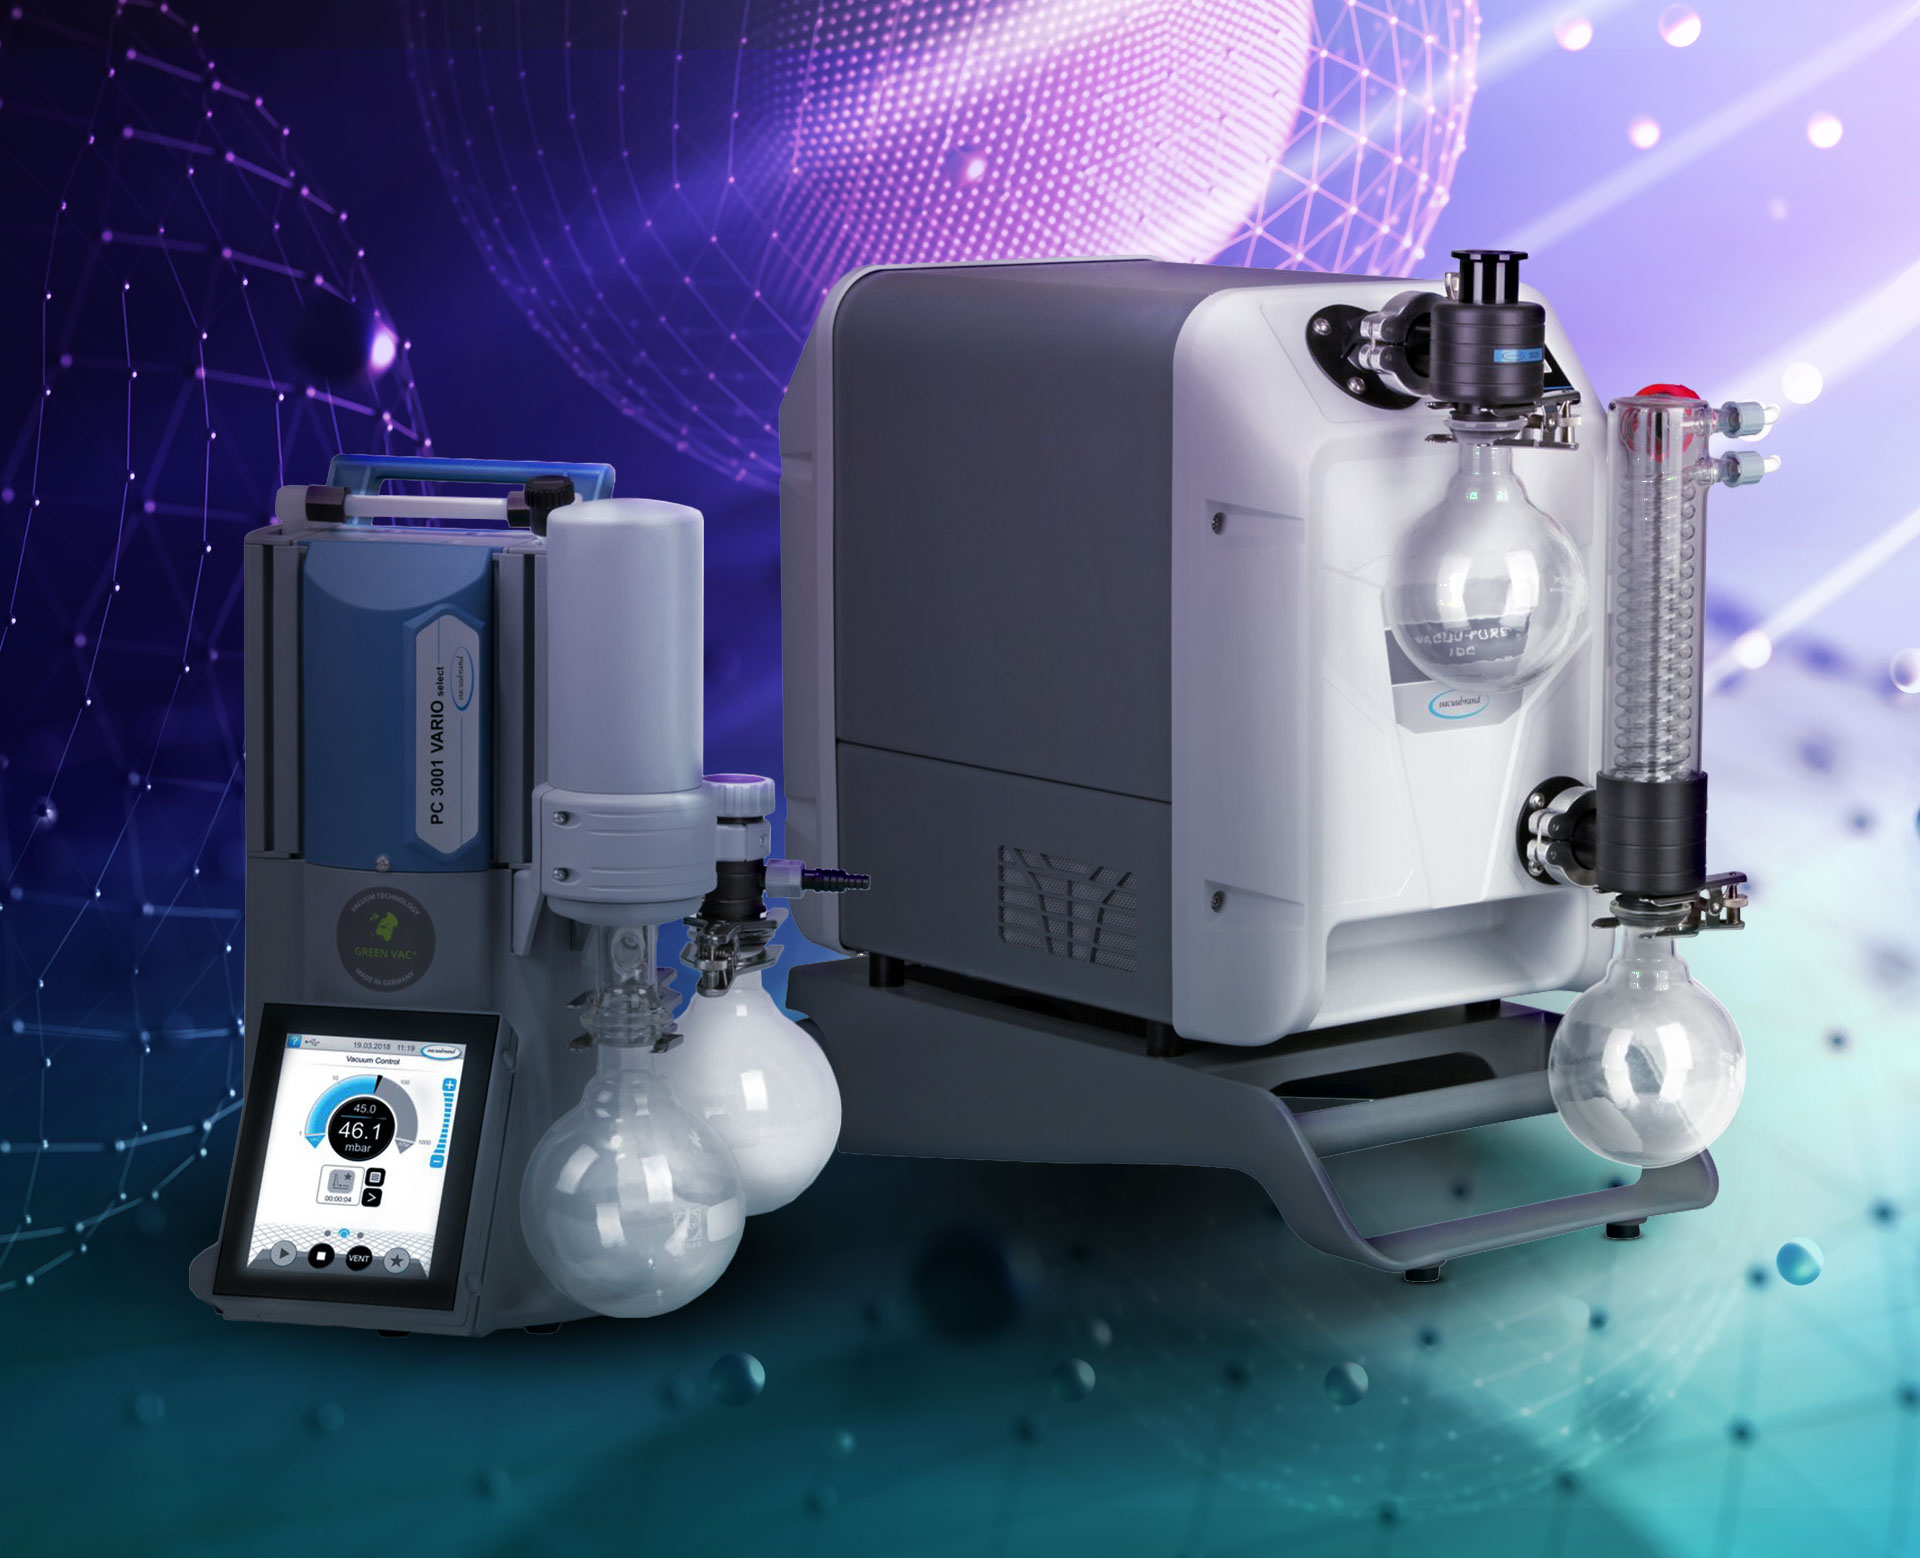 Optimum oil-free vacuum technology for all areas of the laboratory